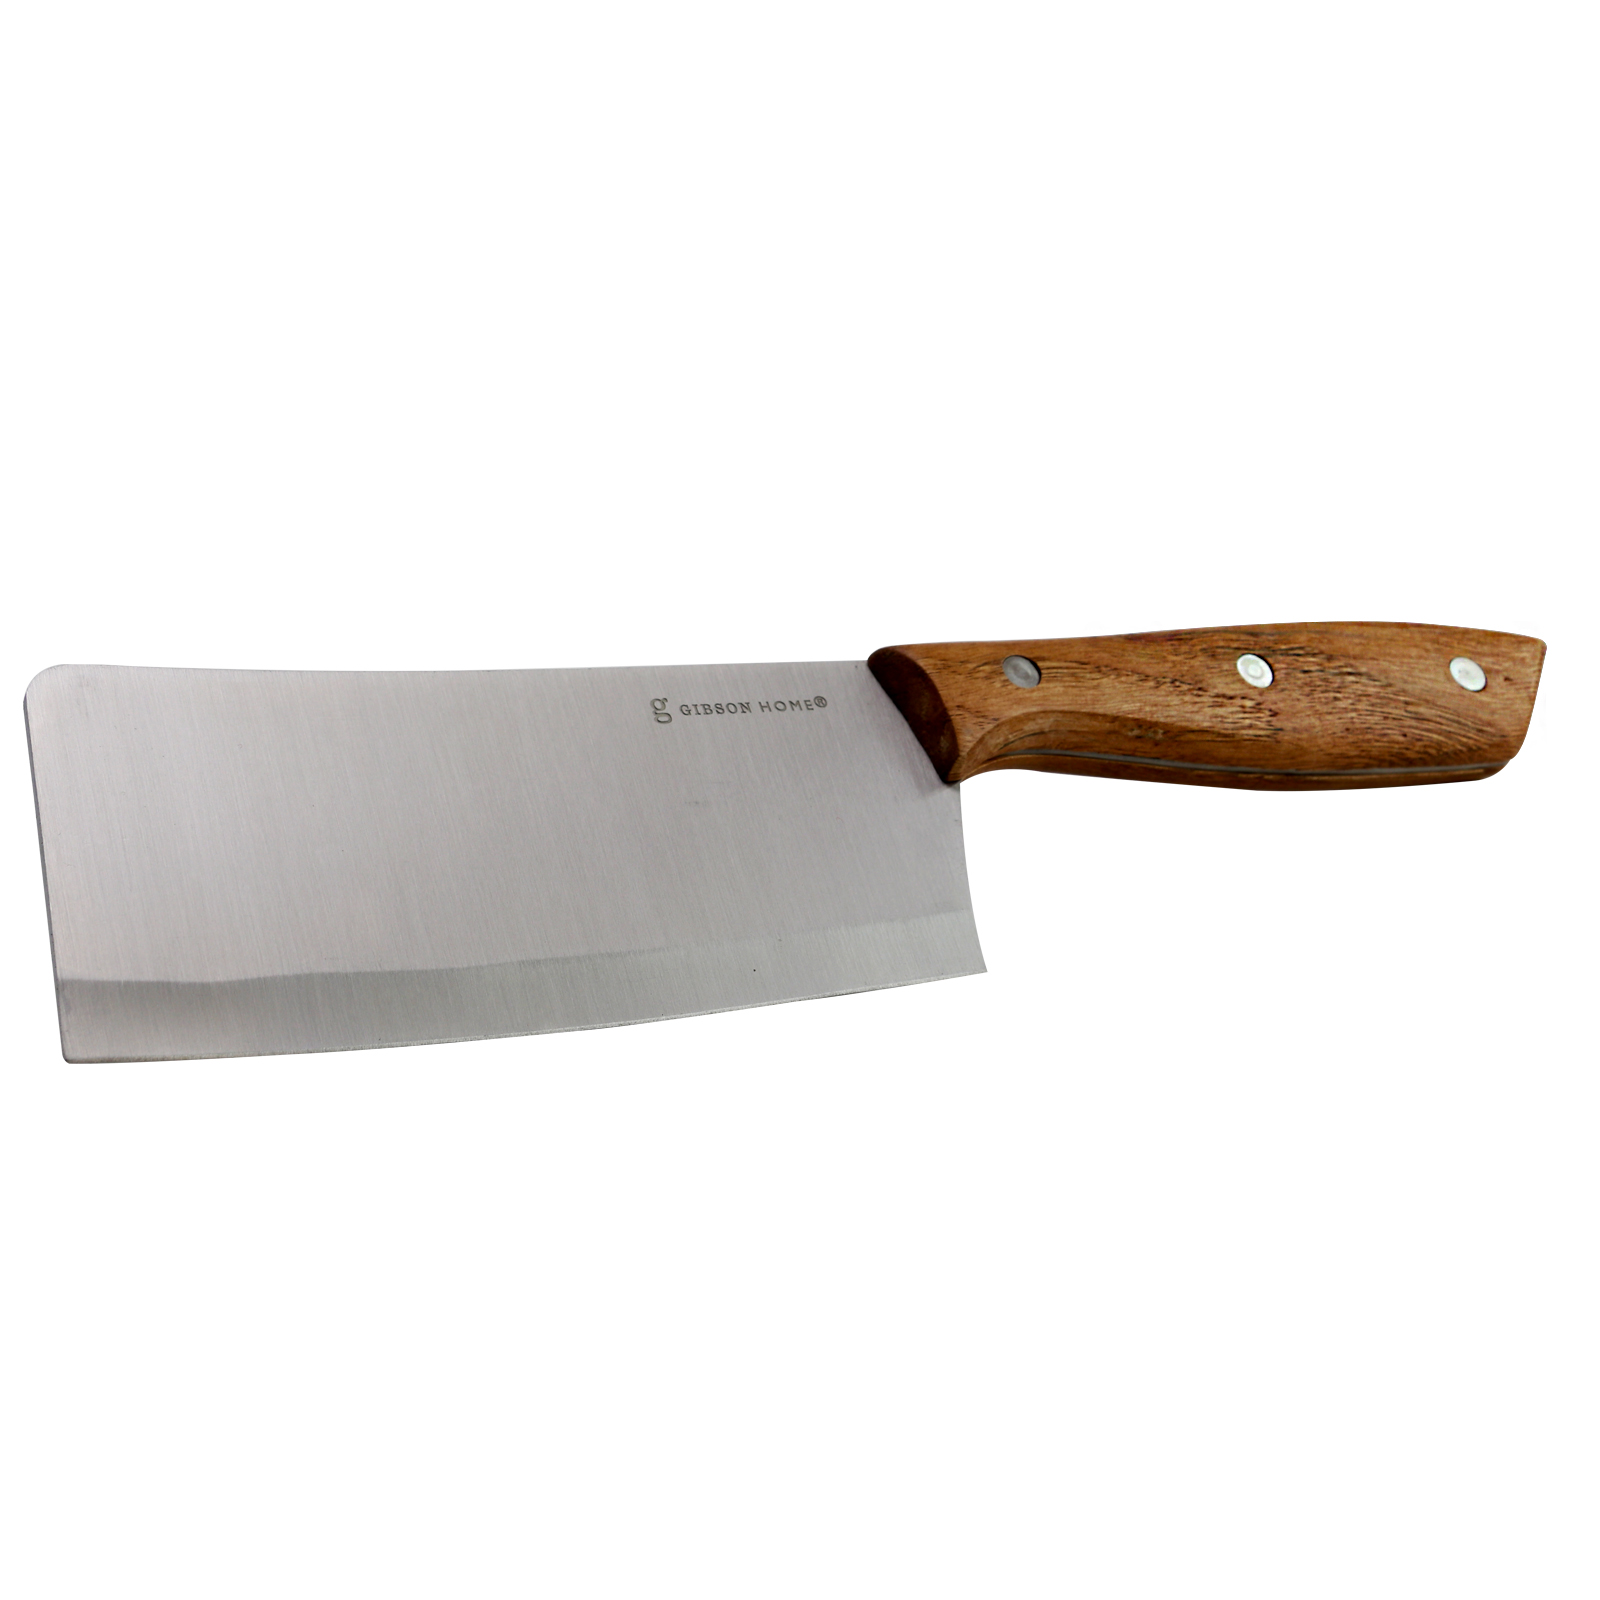 Gibson Home Seward 6 inch Cleaver with Wooden Handle